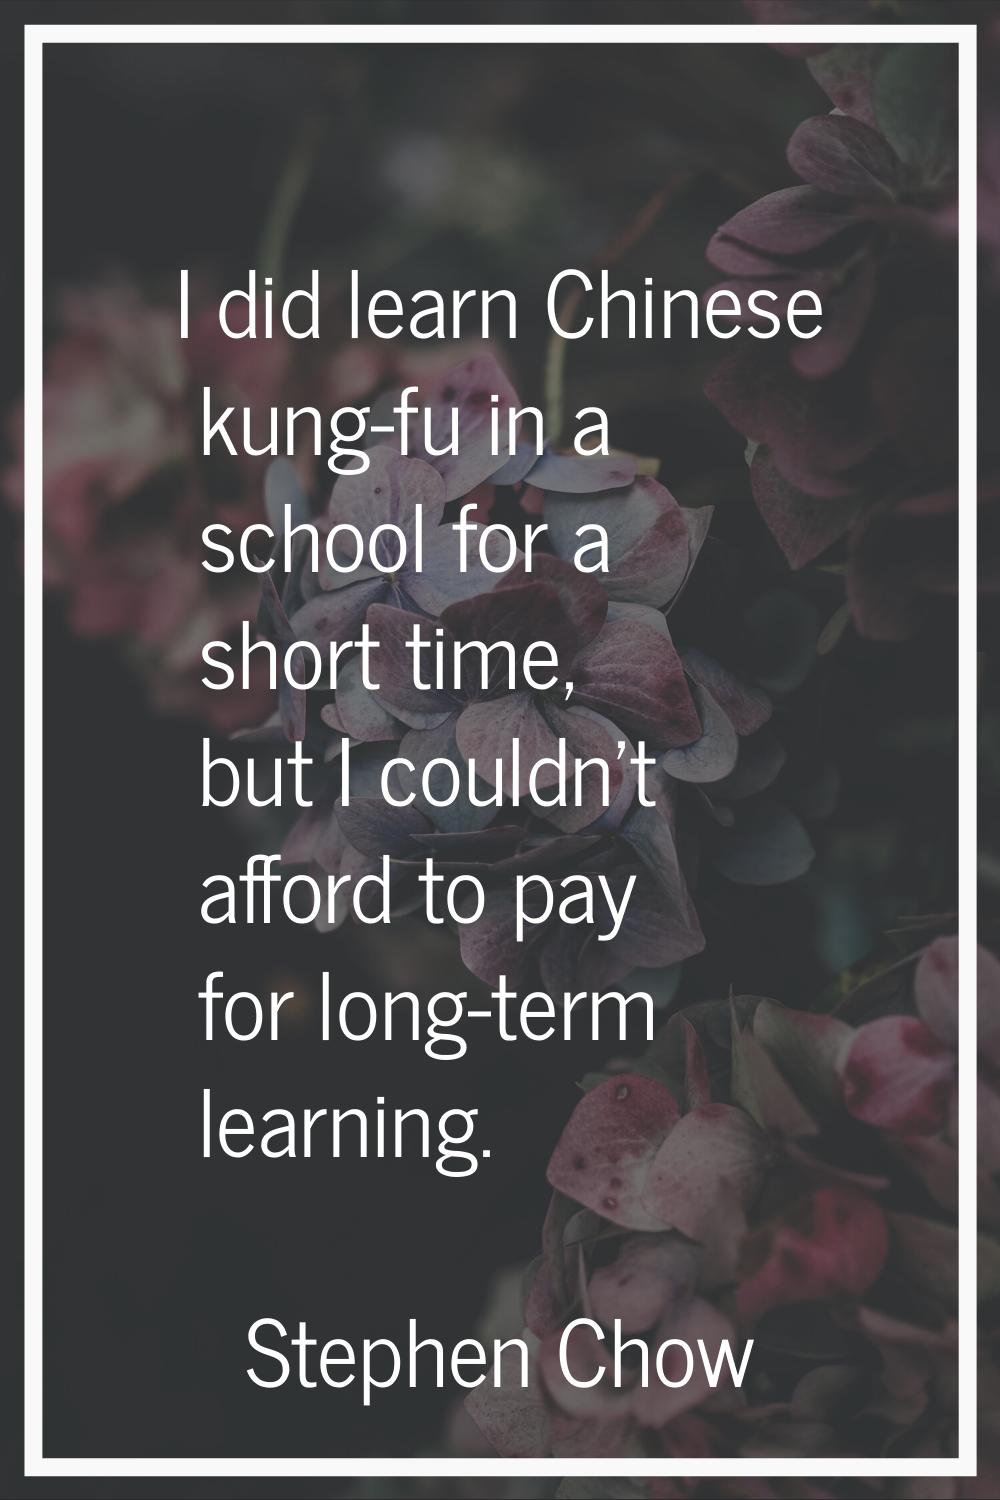 I did learn Chinese kung-fu in a school for a short time, but I couldn't afford to pay for long-ter